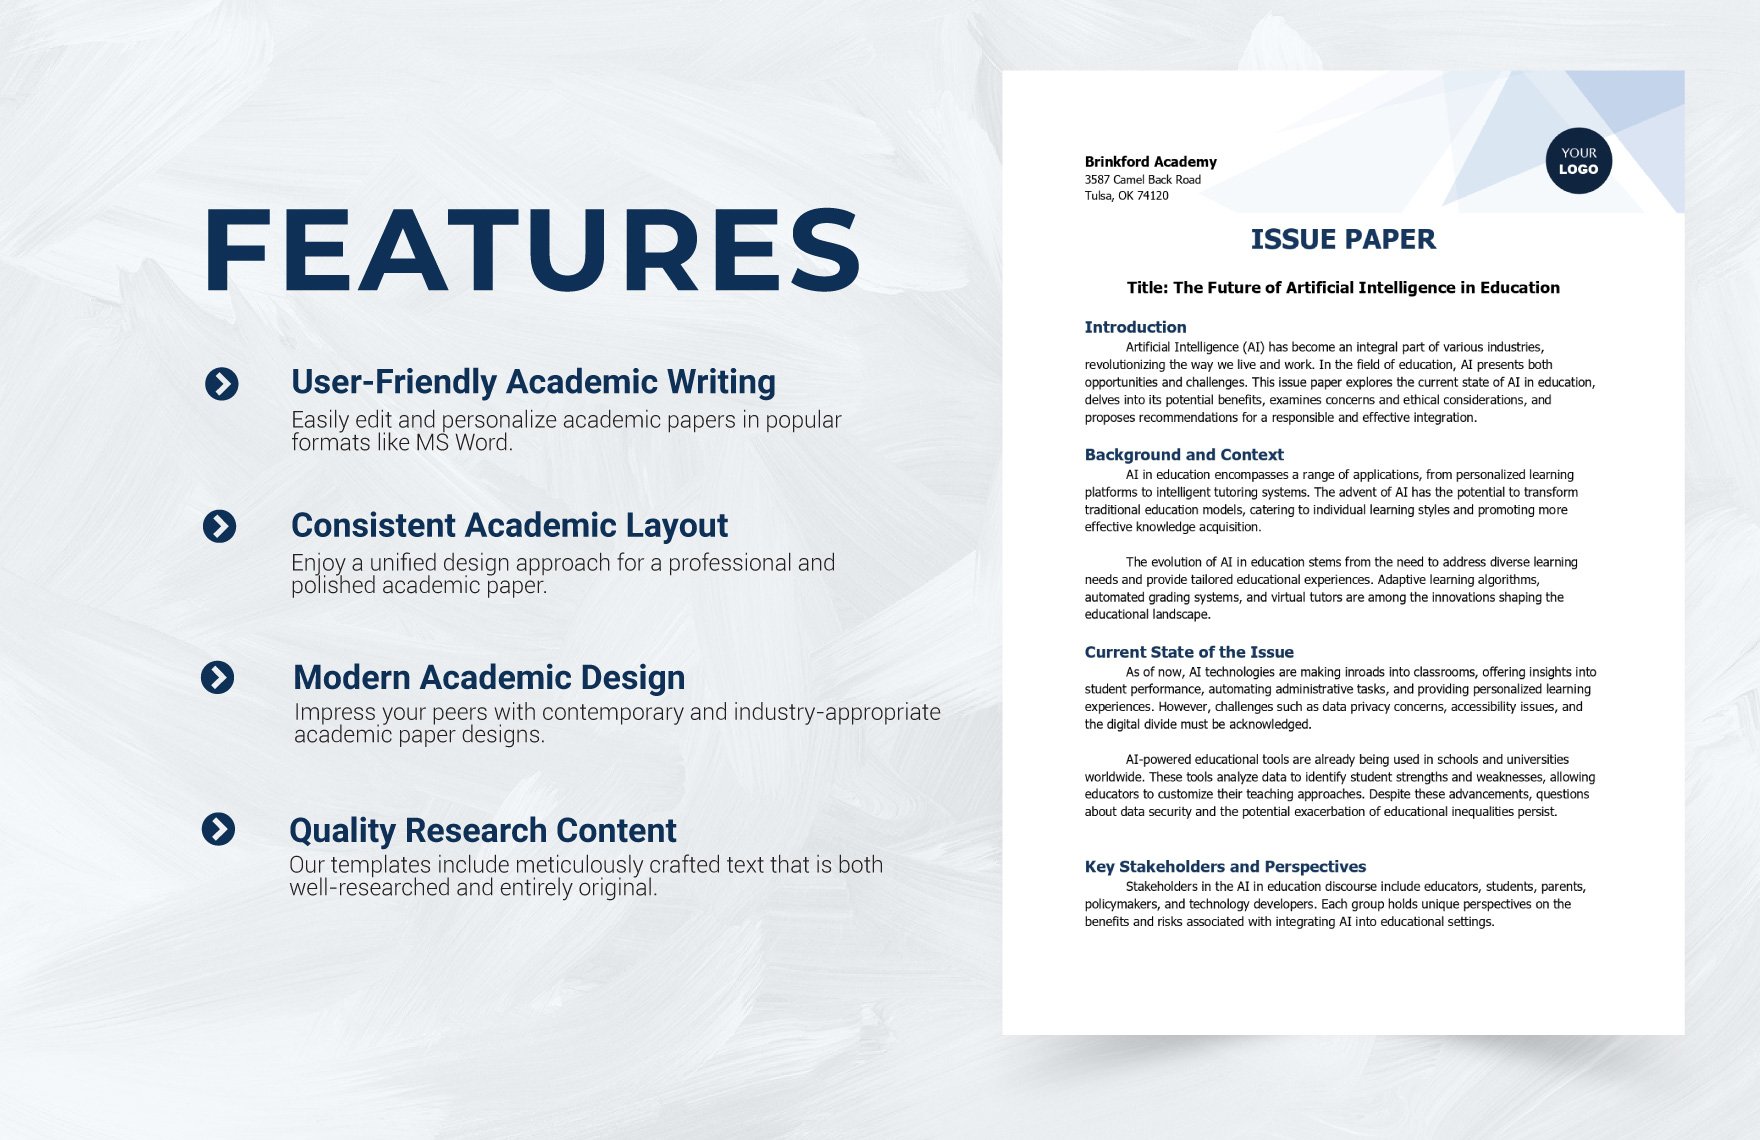 Issue Paper Template